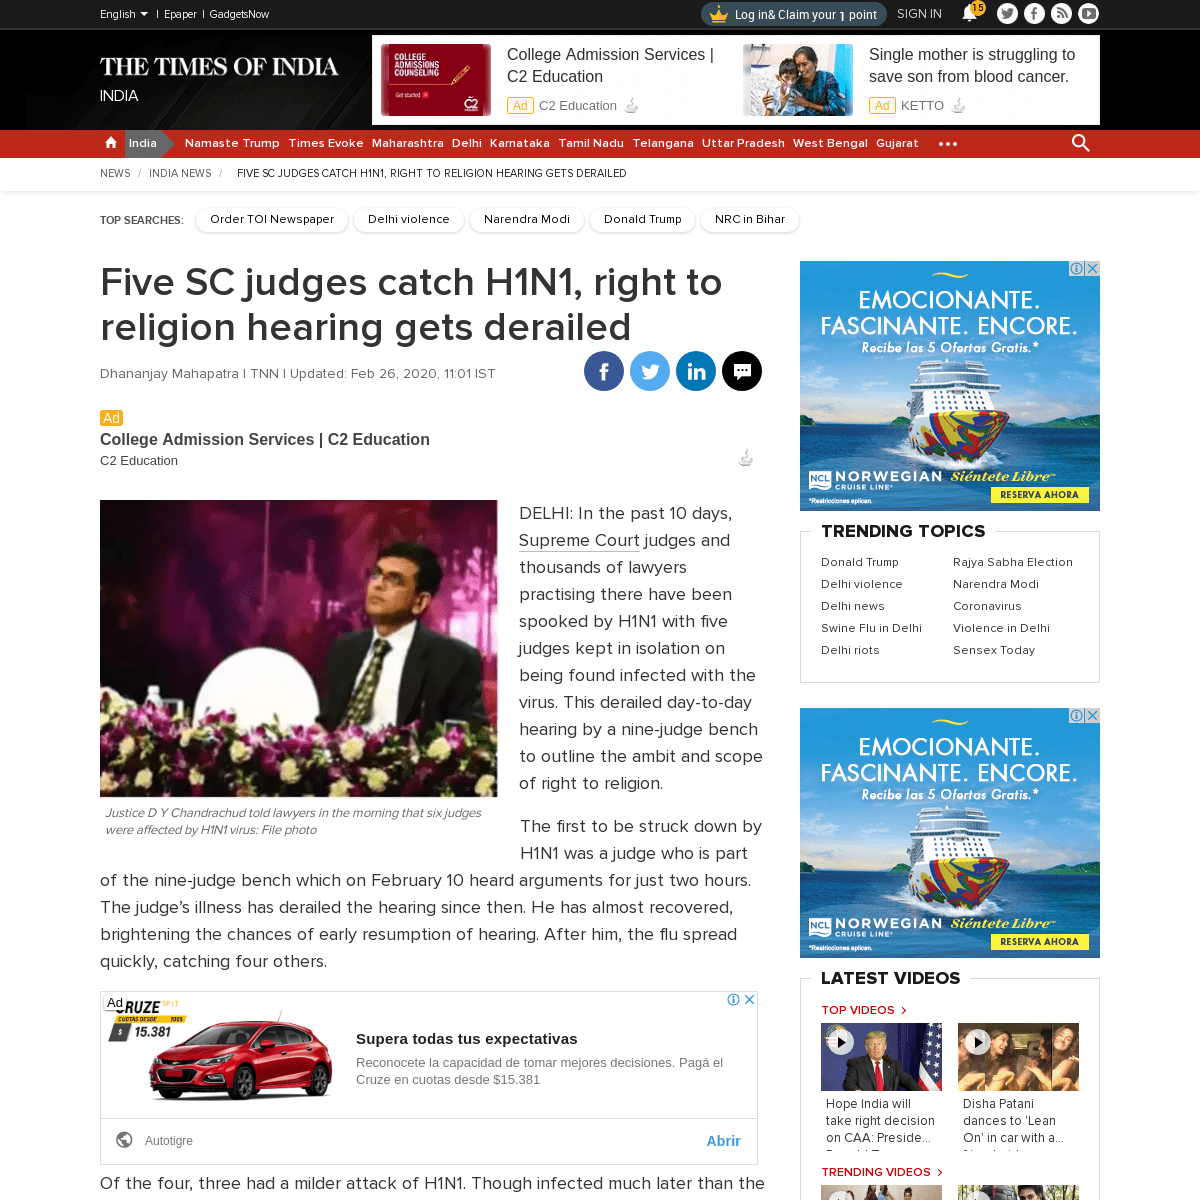 A complete backup of timesofindia.indiatimes.com/india/five-sc-judges-catch-h1n1-right-to-religion-hearing-gets-derailed/article